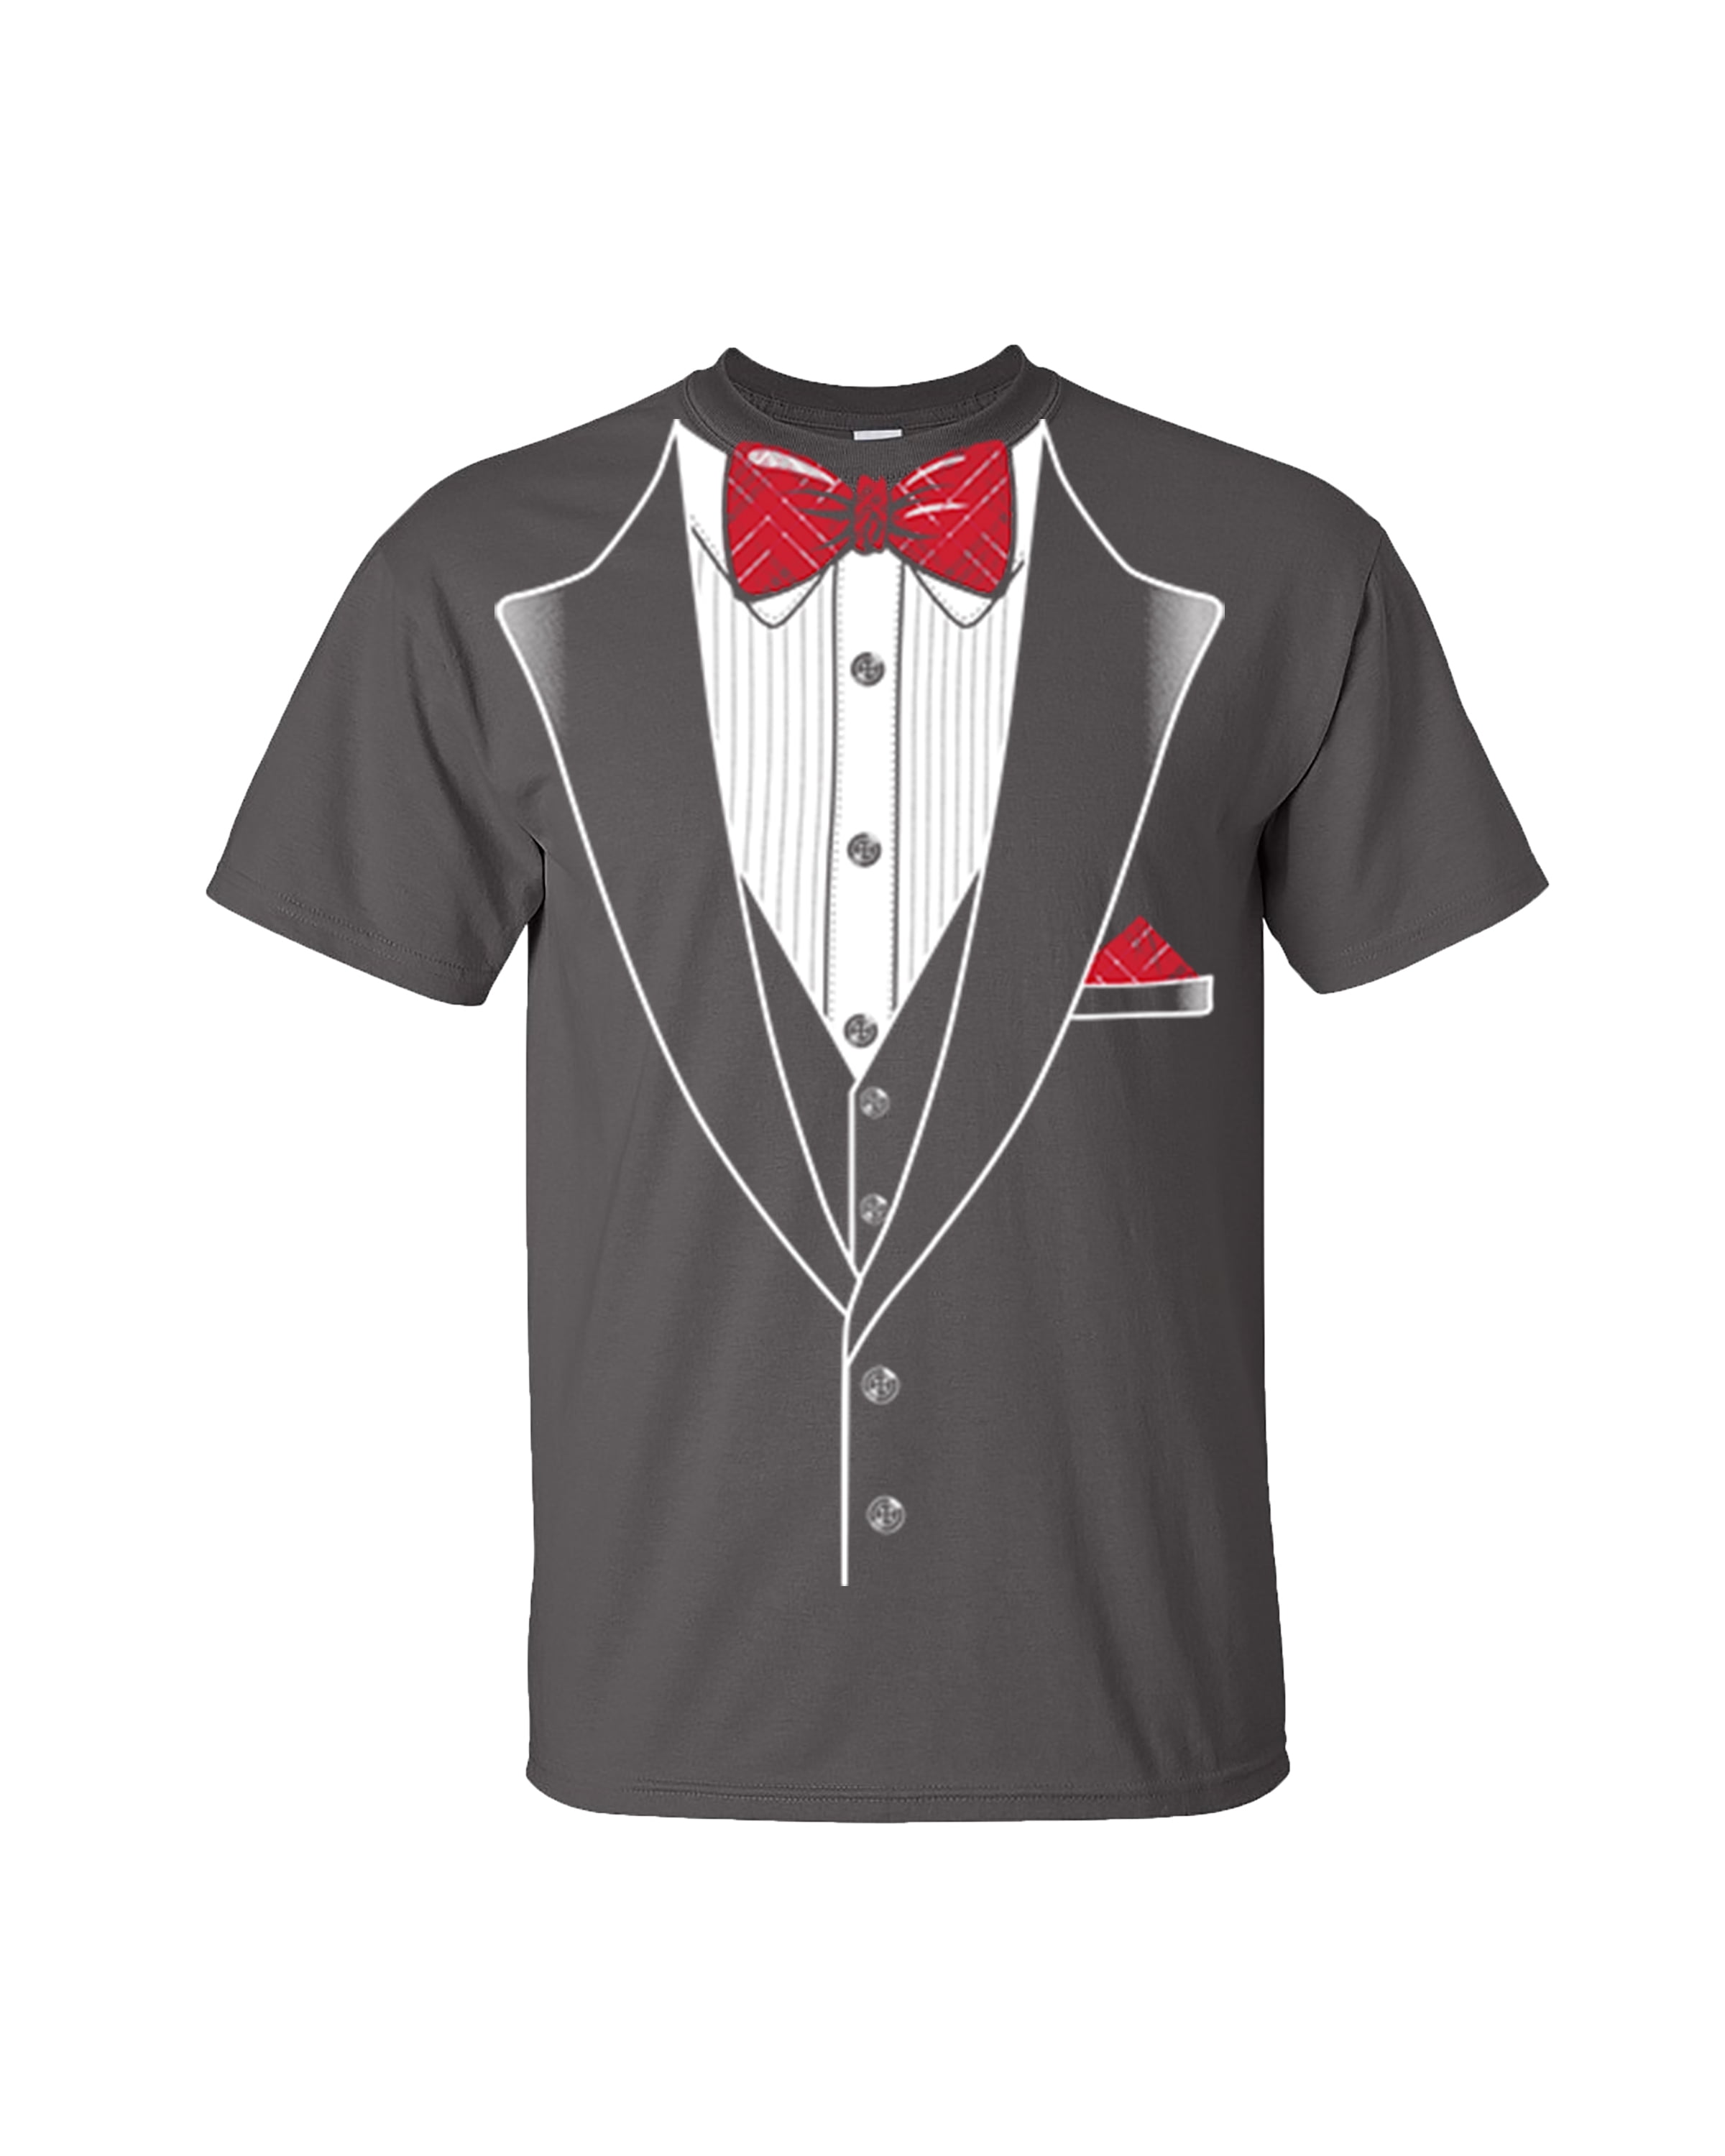 ROSE,TSHIRT Tuxedo Suit Bow Tie fancy dress T SHIRT WEDDING funny fathers gift 